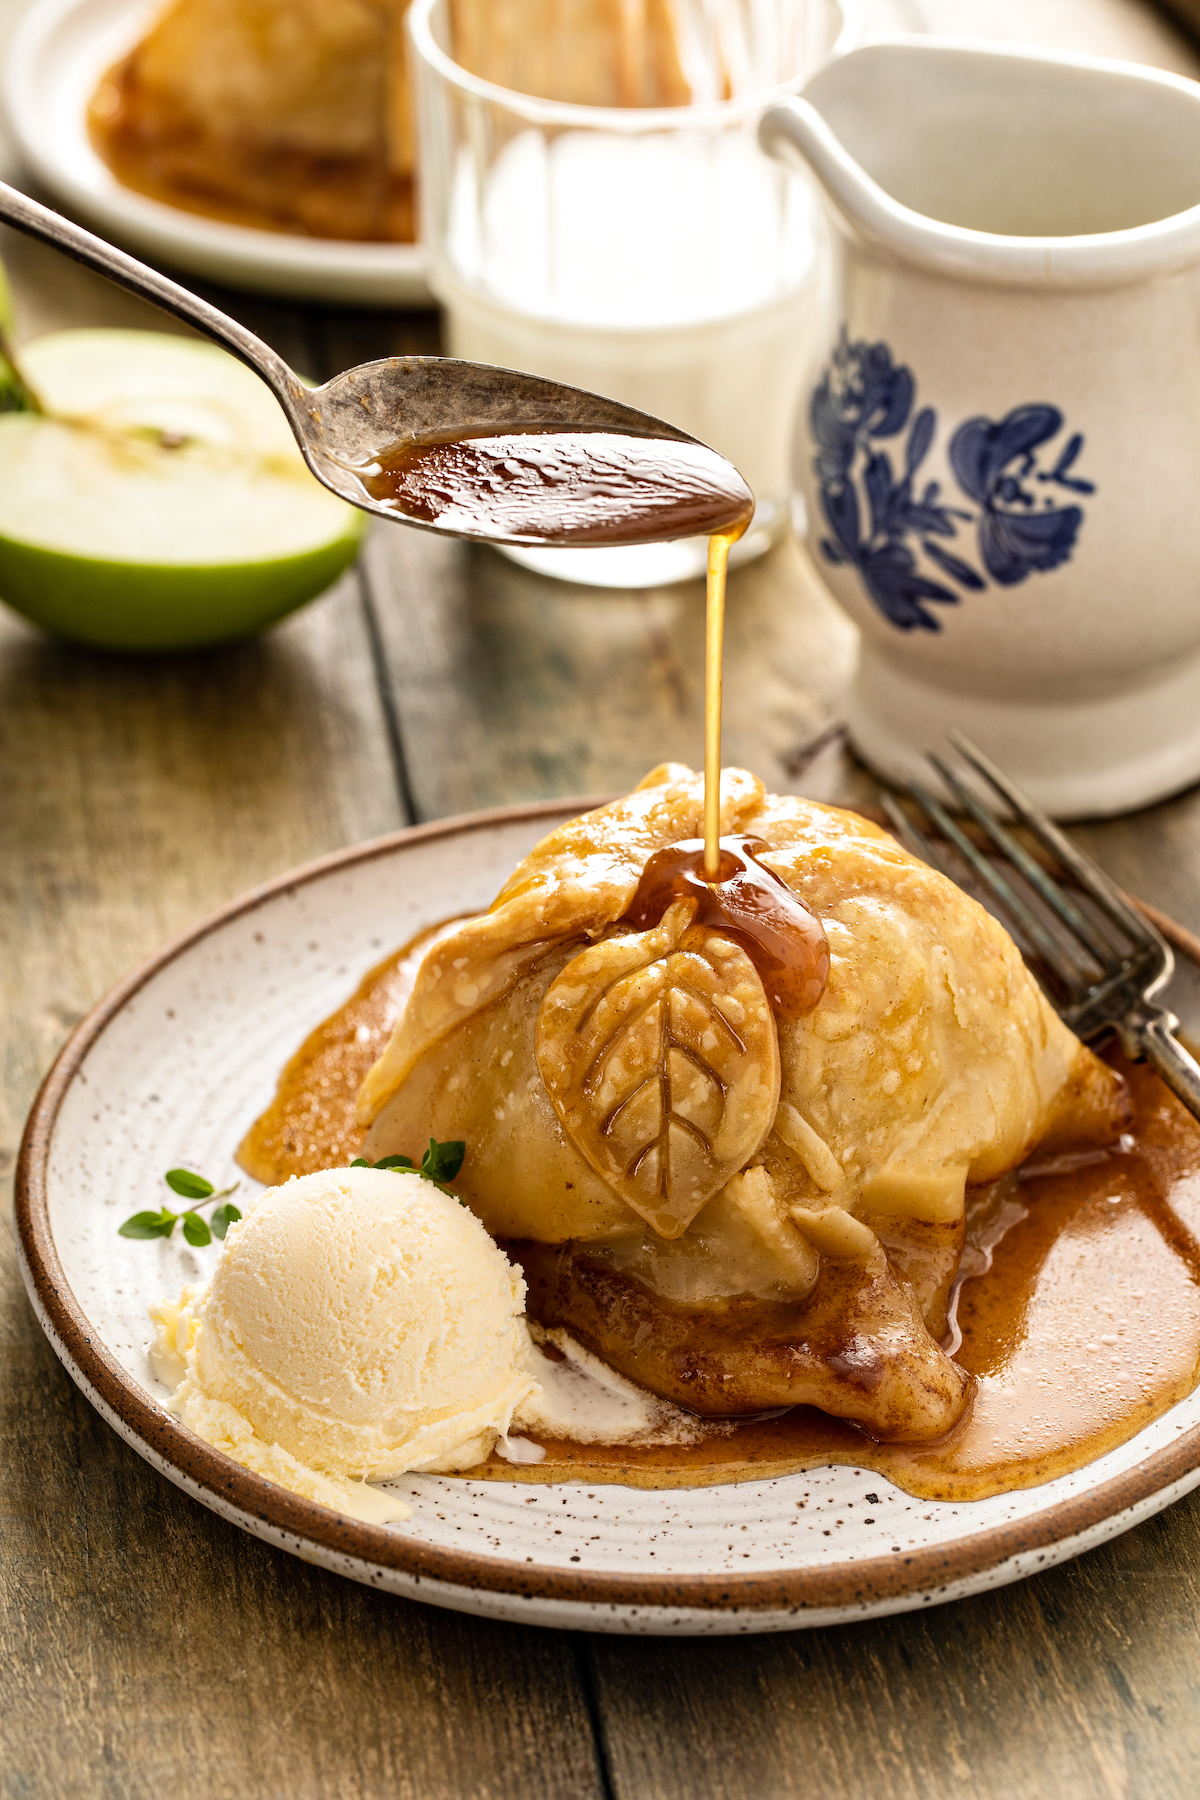 A baked apple in pastry with cinnamon sauce and a scoop of vanilla ice cream.